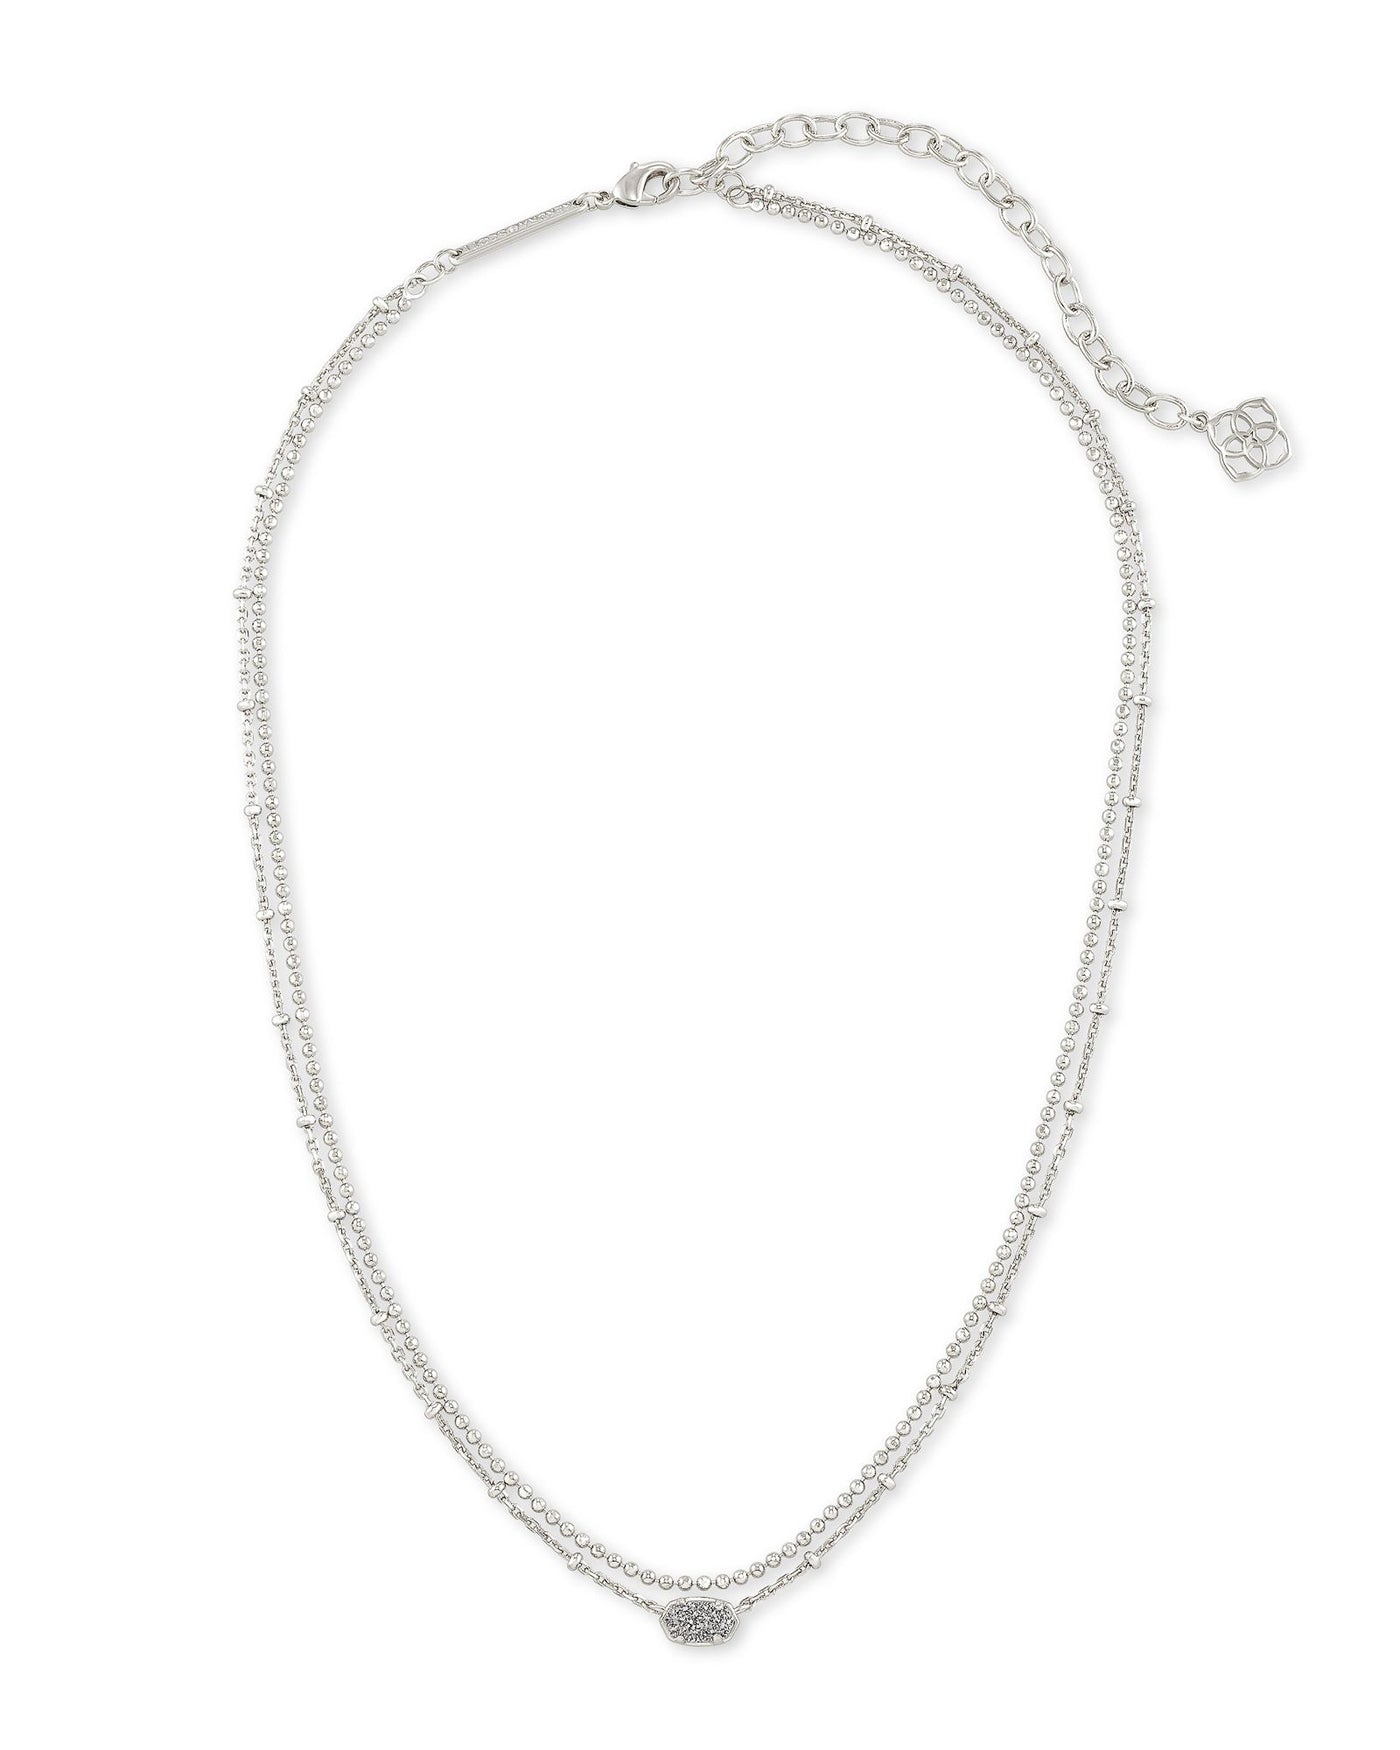 Kendra Scott Emilie Multi Strand Necklace-Necklaces-Kendra Scott-Market Street Nest, Fashionable Clothing, Shoes and Home Décor Located in Mabank, TX